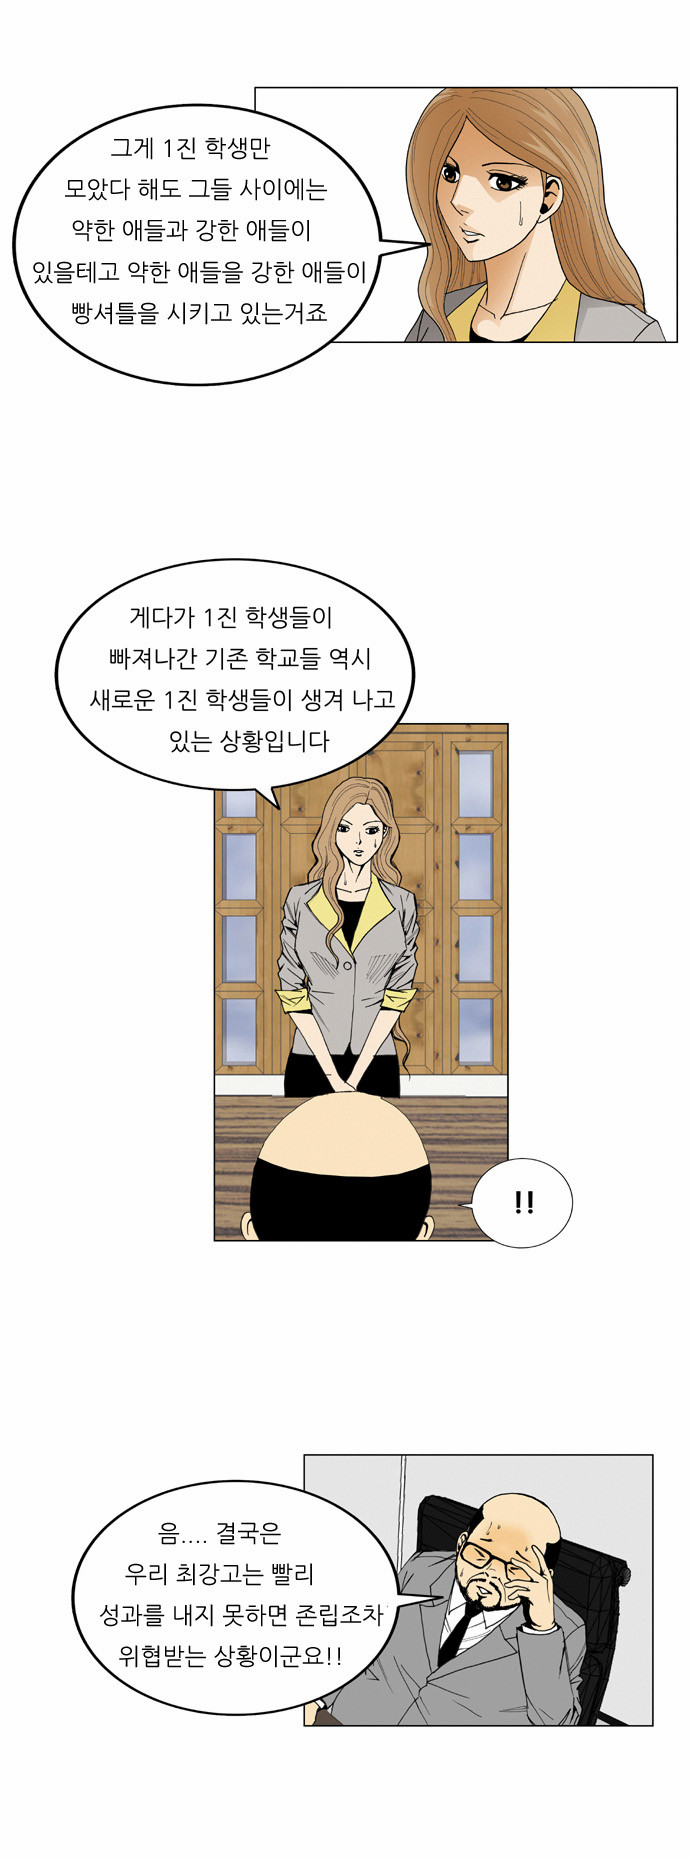 Ultimate Legend - Kang Hae Hyo - Chapter 40 - Page 4